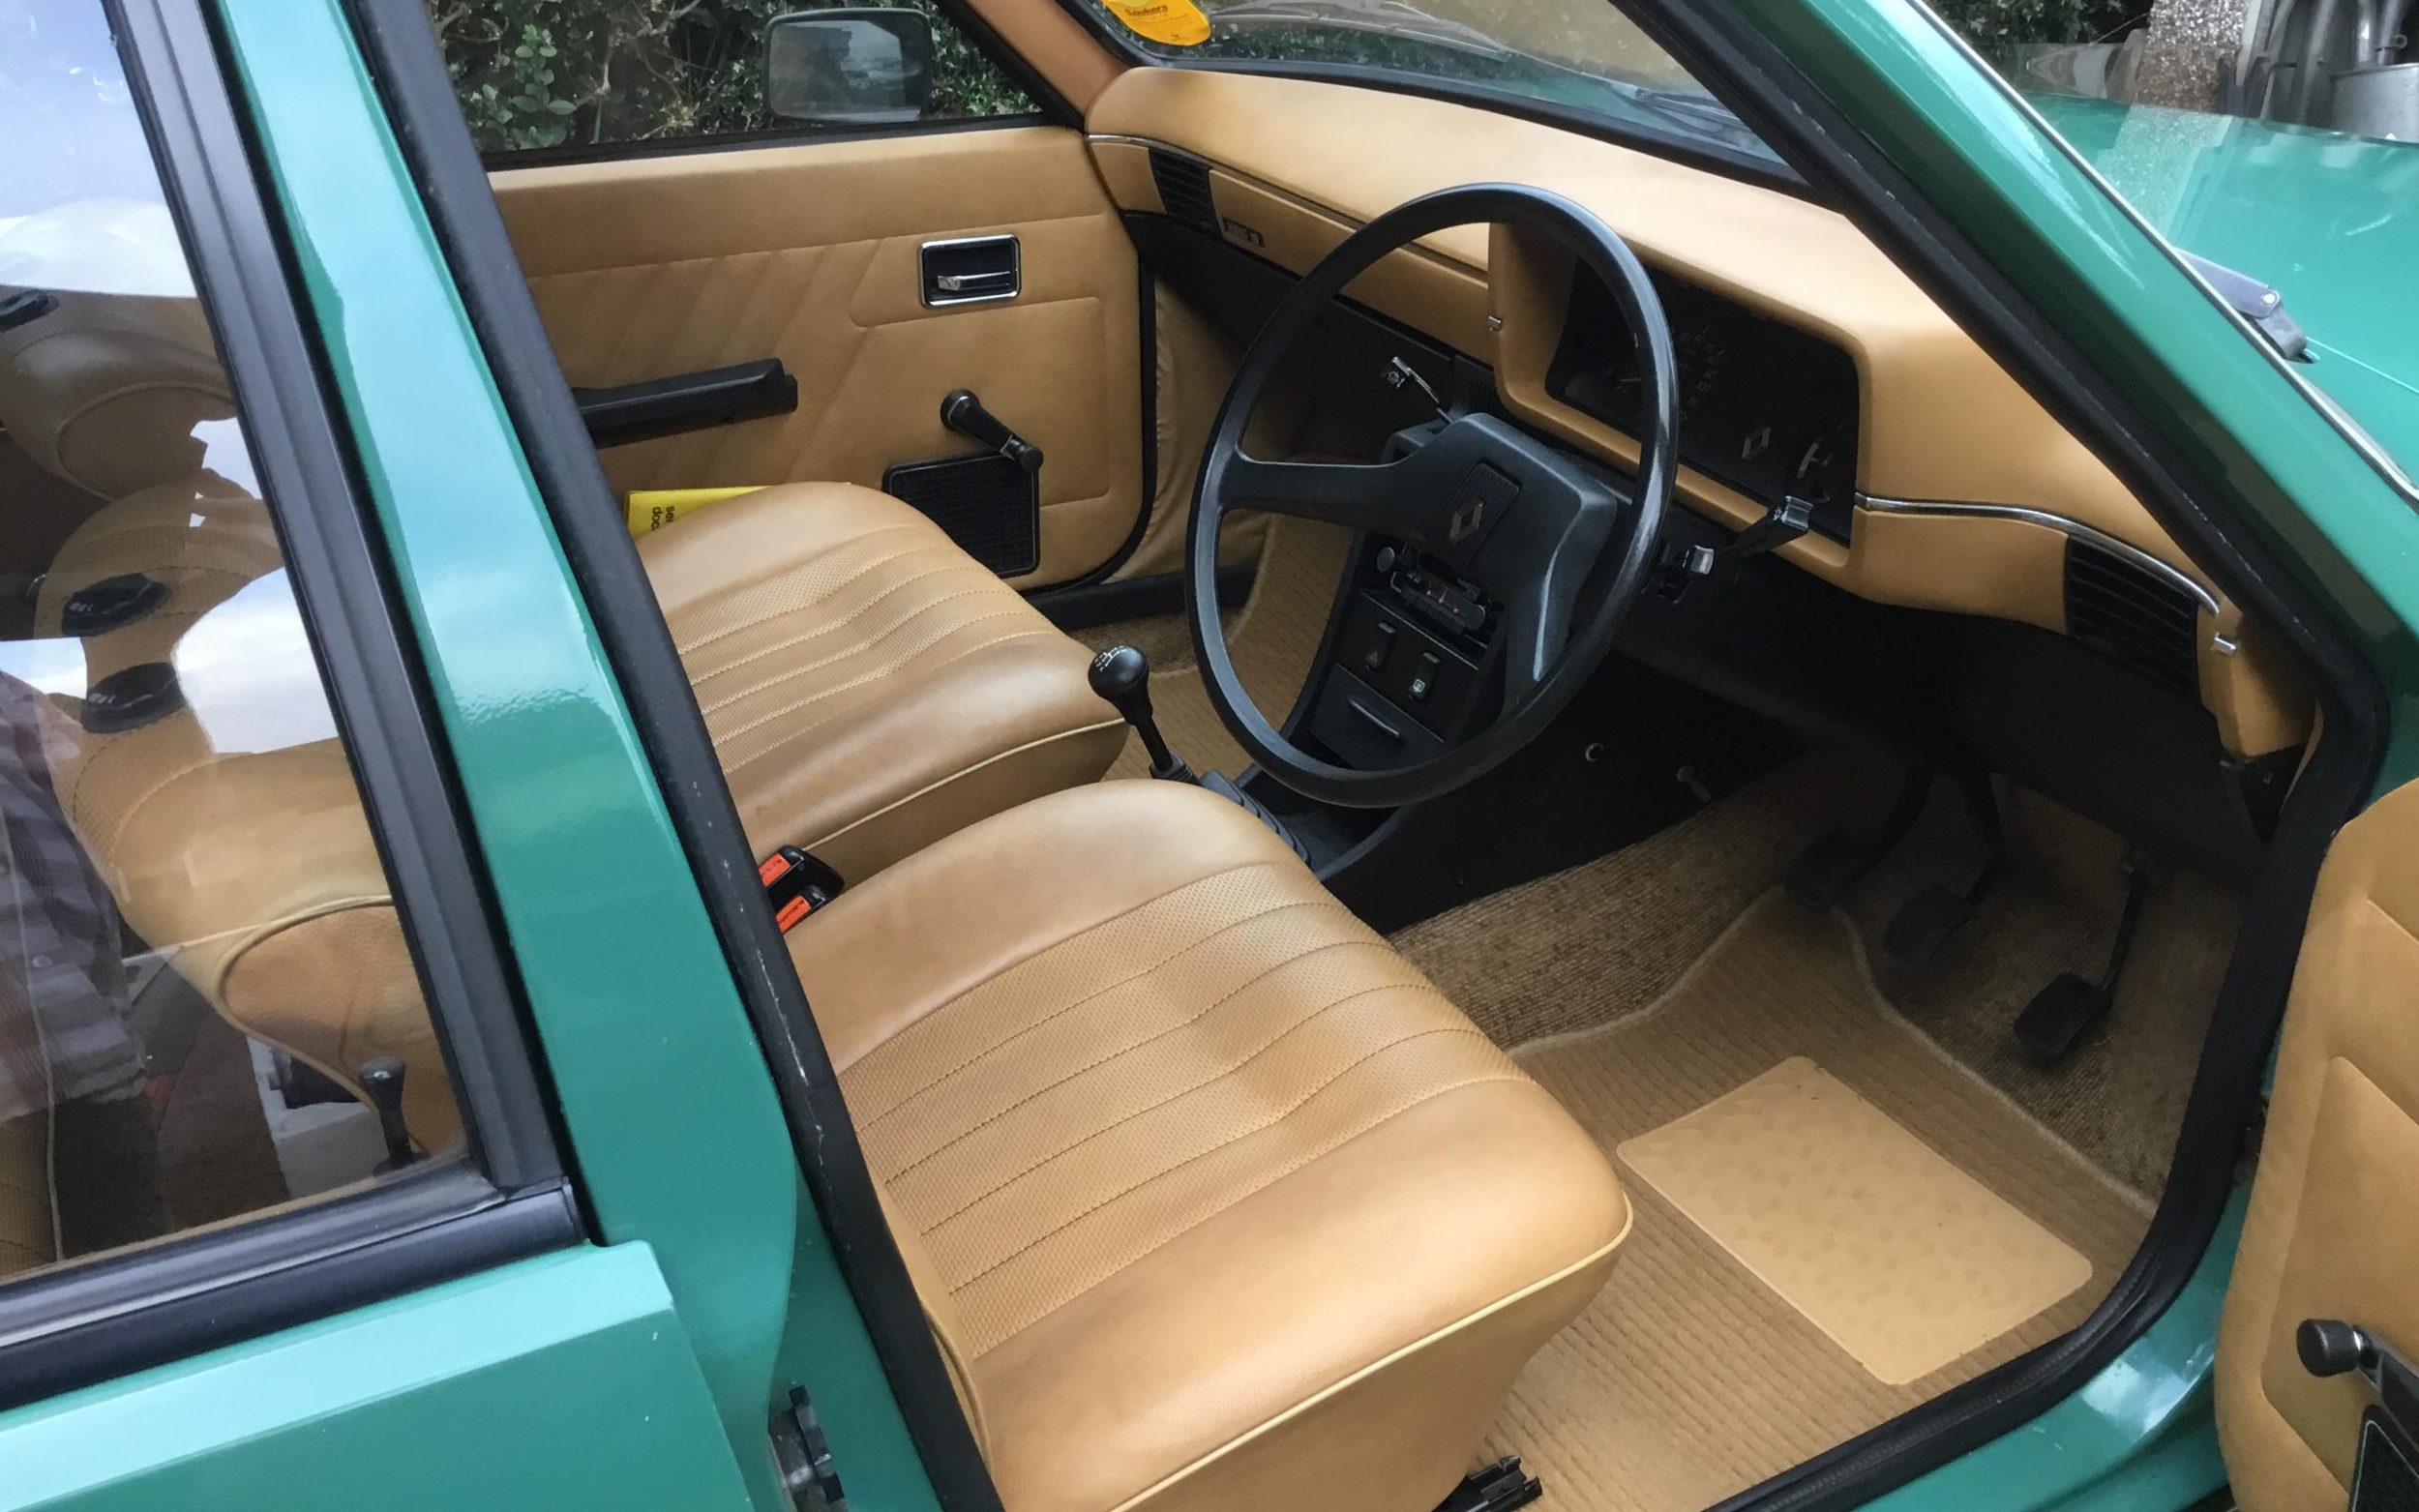 uk’s rarest cars: the 1979 renault 18 tl, one of only 26 left